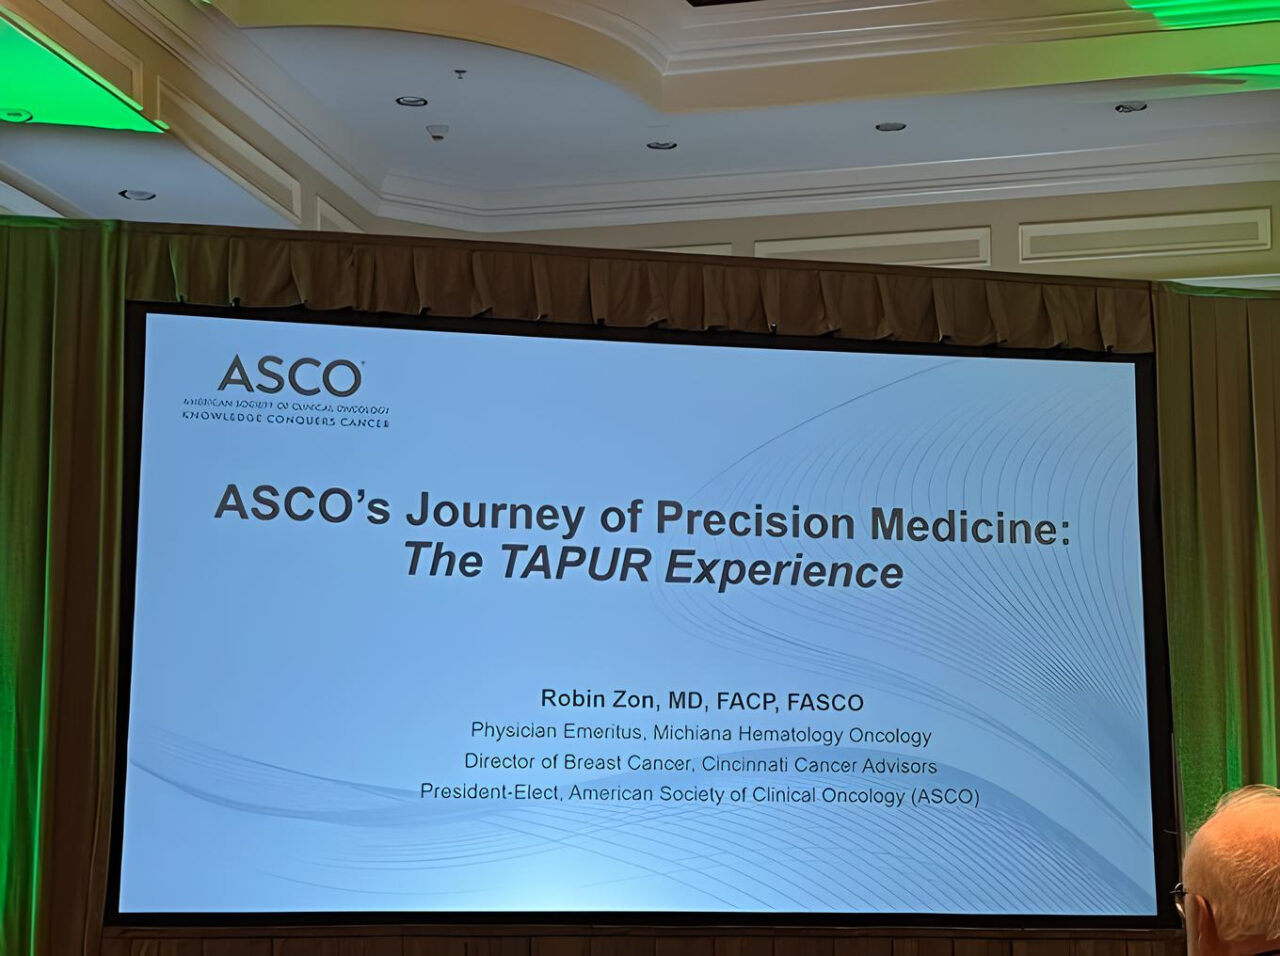 Rachna Shroff: The ASCO TAPUR experience is an incredible story!